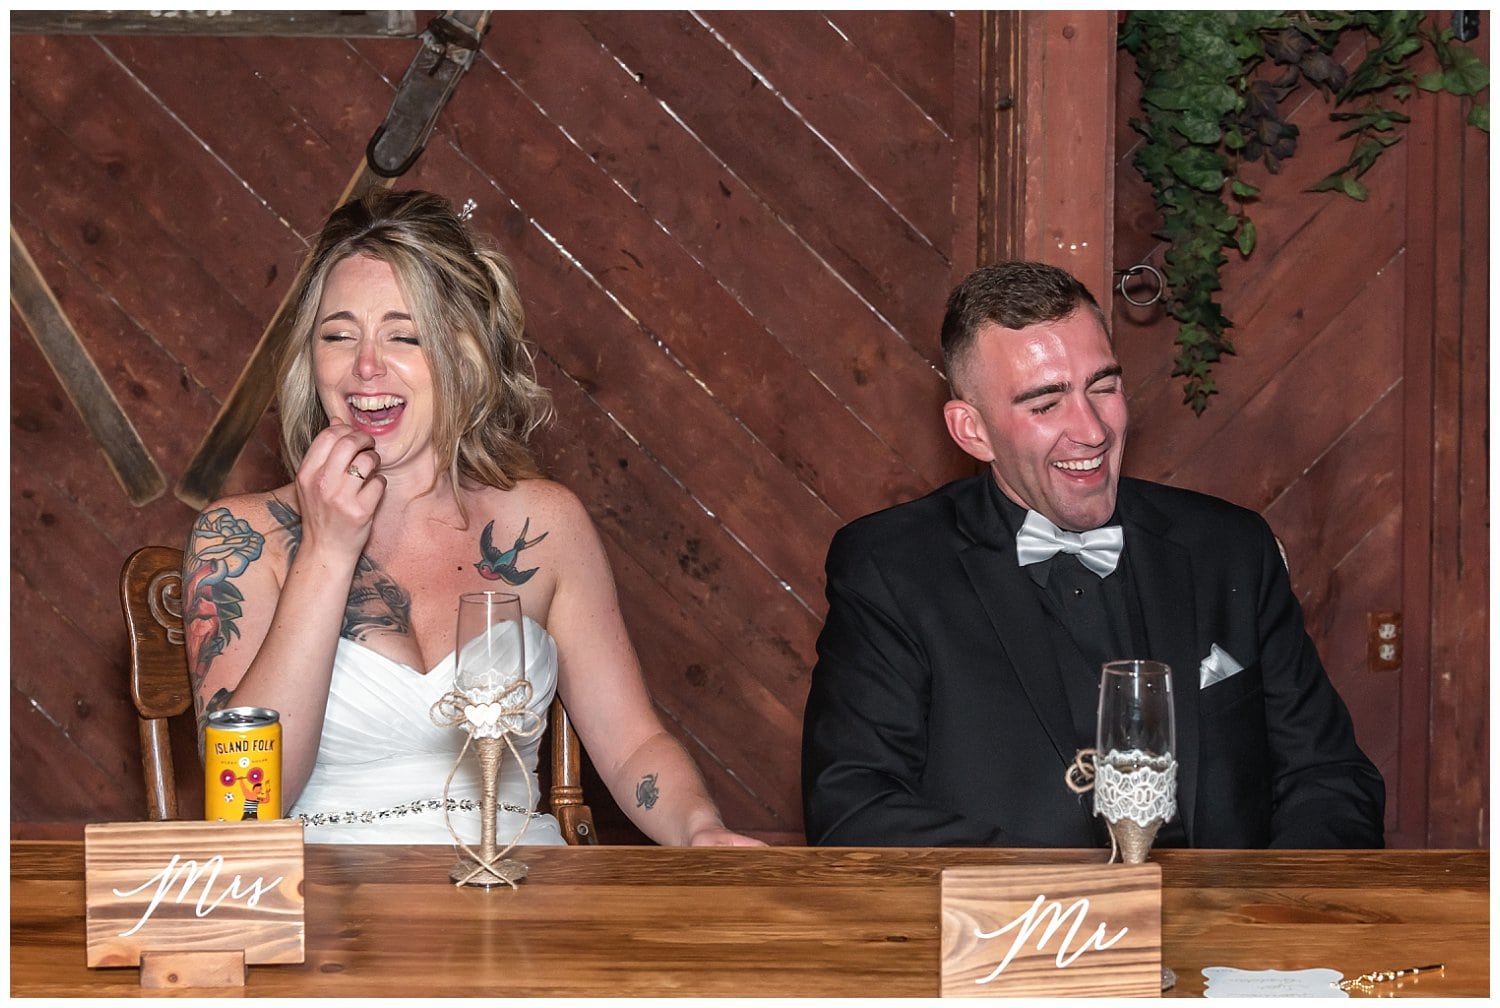 The bride and groom laugh during parent speeches at their wedding reception in Hatfield Farm's barn.